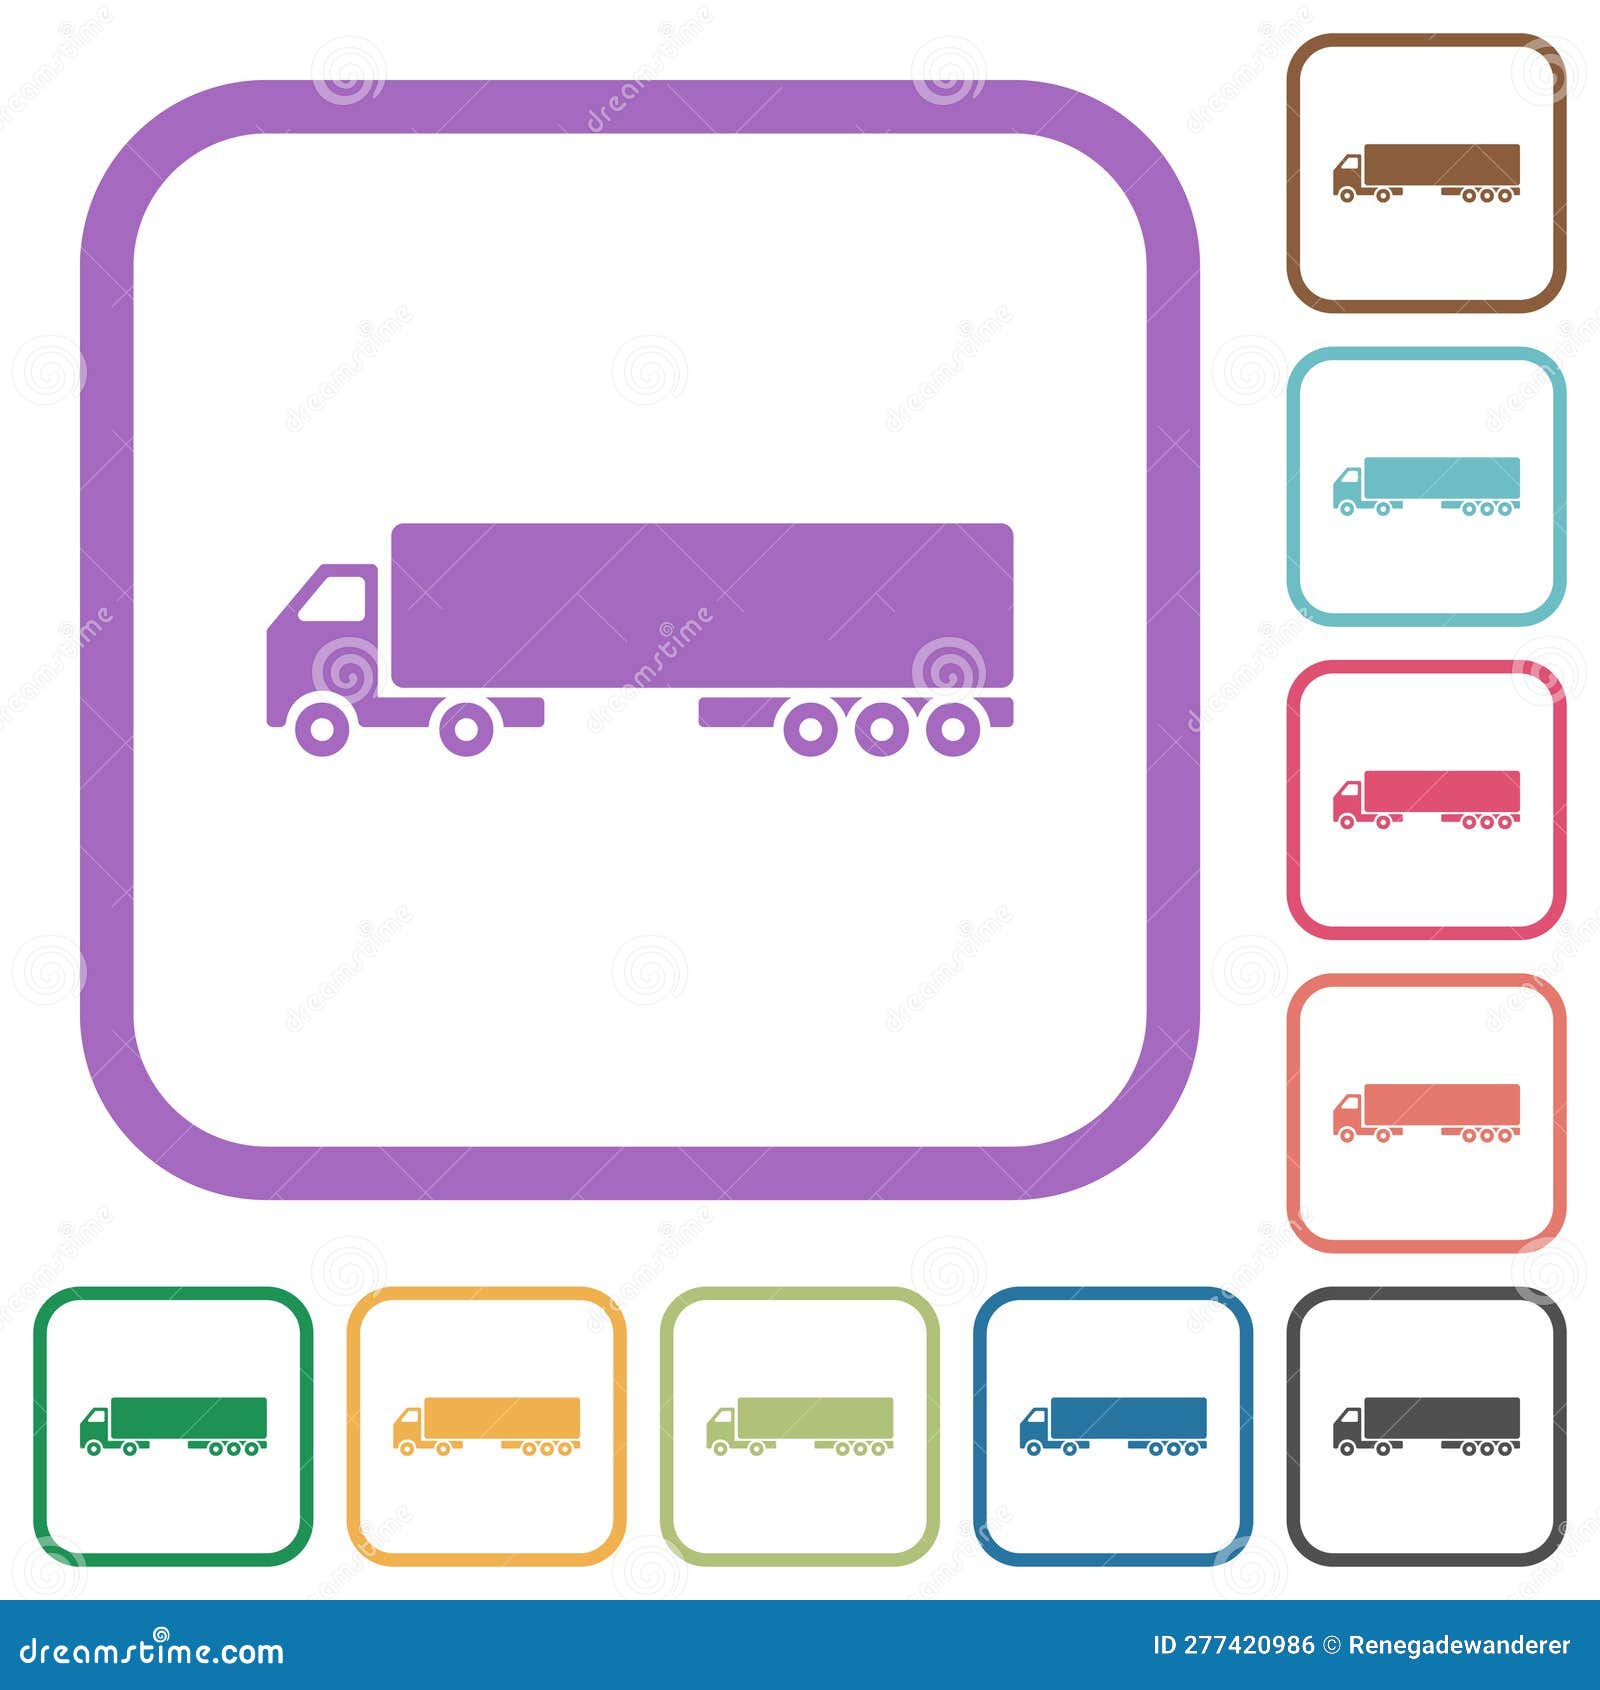 camion side view simple icons